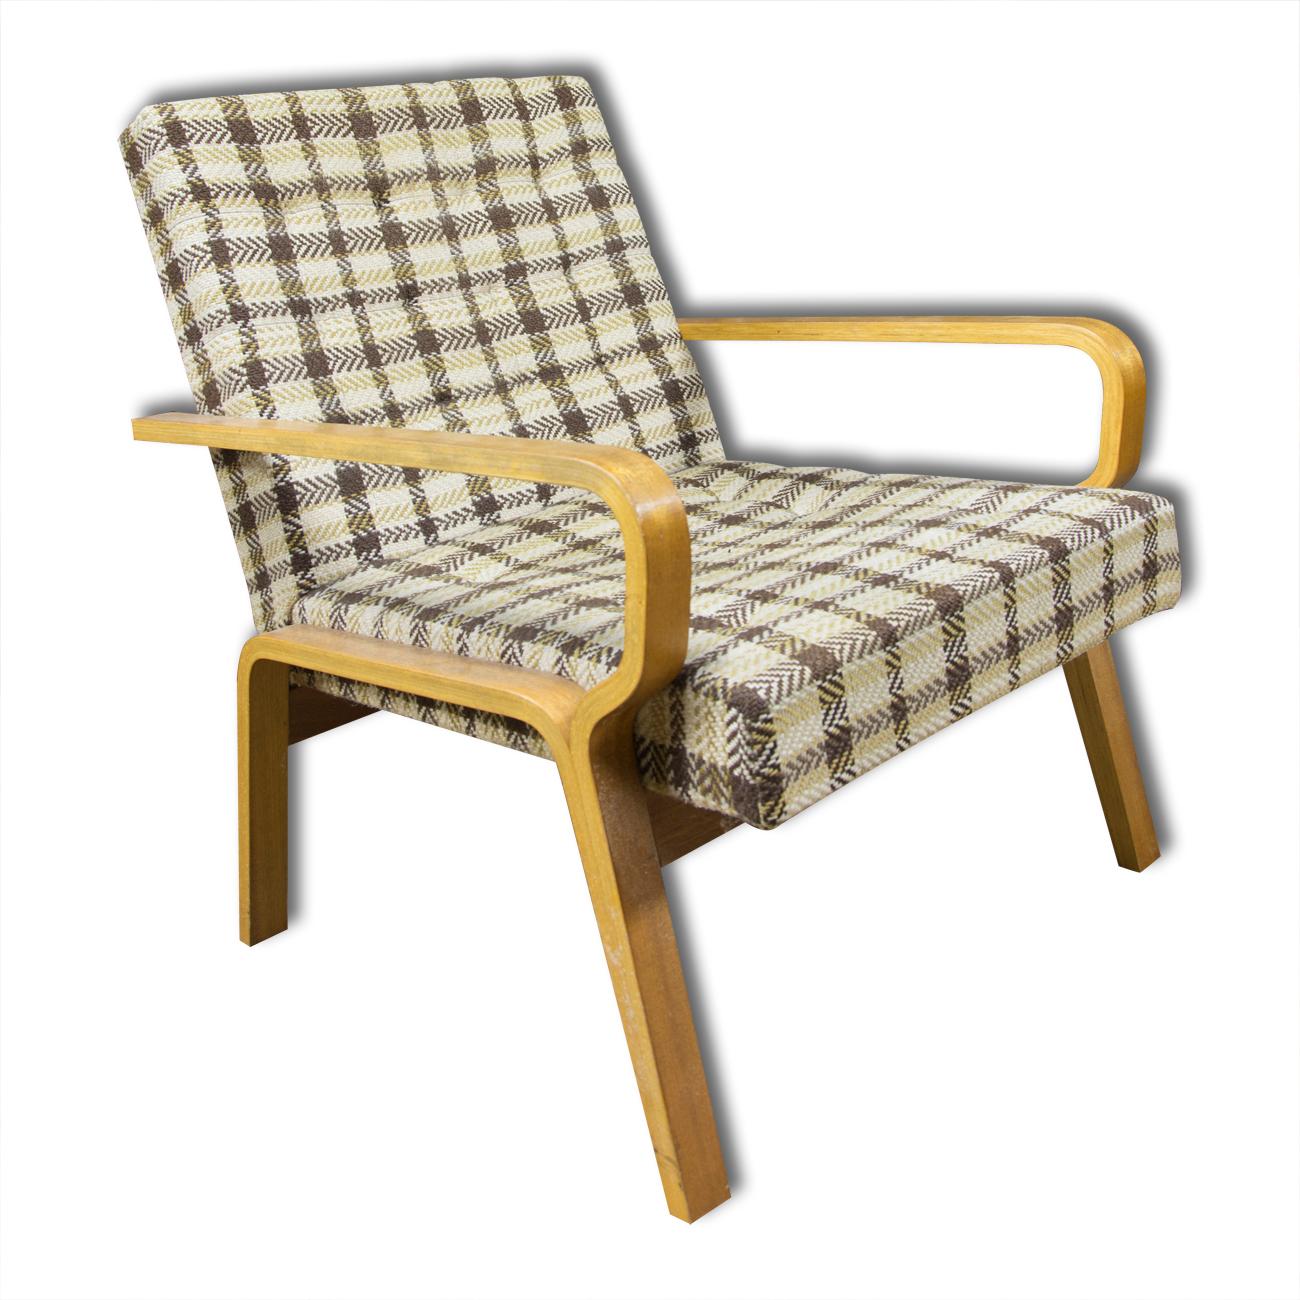 Midcentury armchair, designed by Ludvík Volák for Dřevopodnik Holešov, made in Czechoslovakia. Bentwood, upholstery is in very good original condition without any visible damage. Overall in very good condition.



 